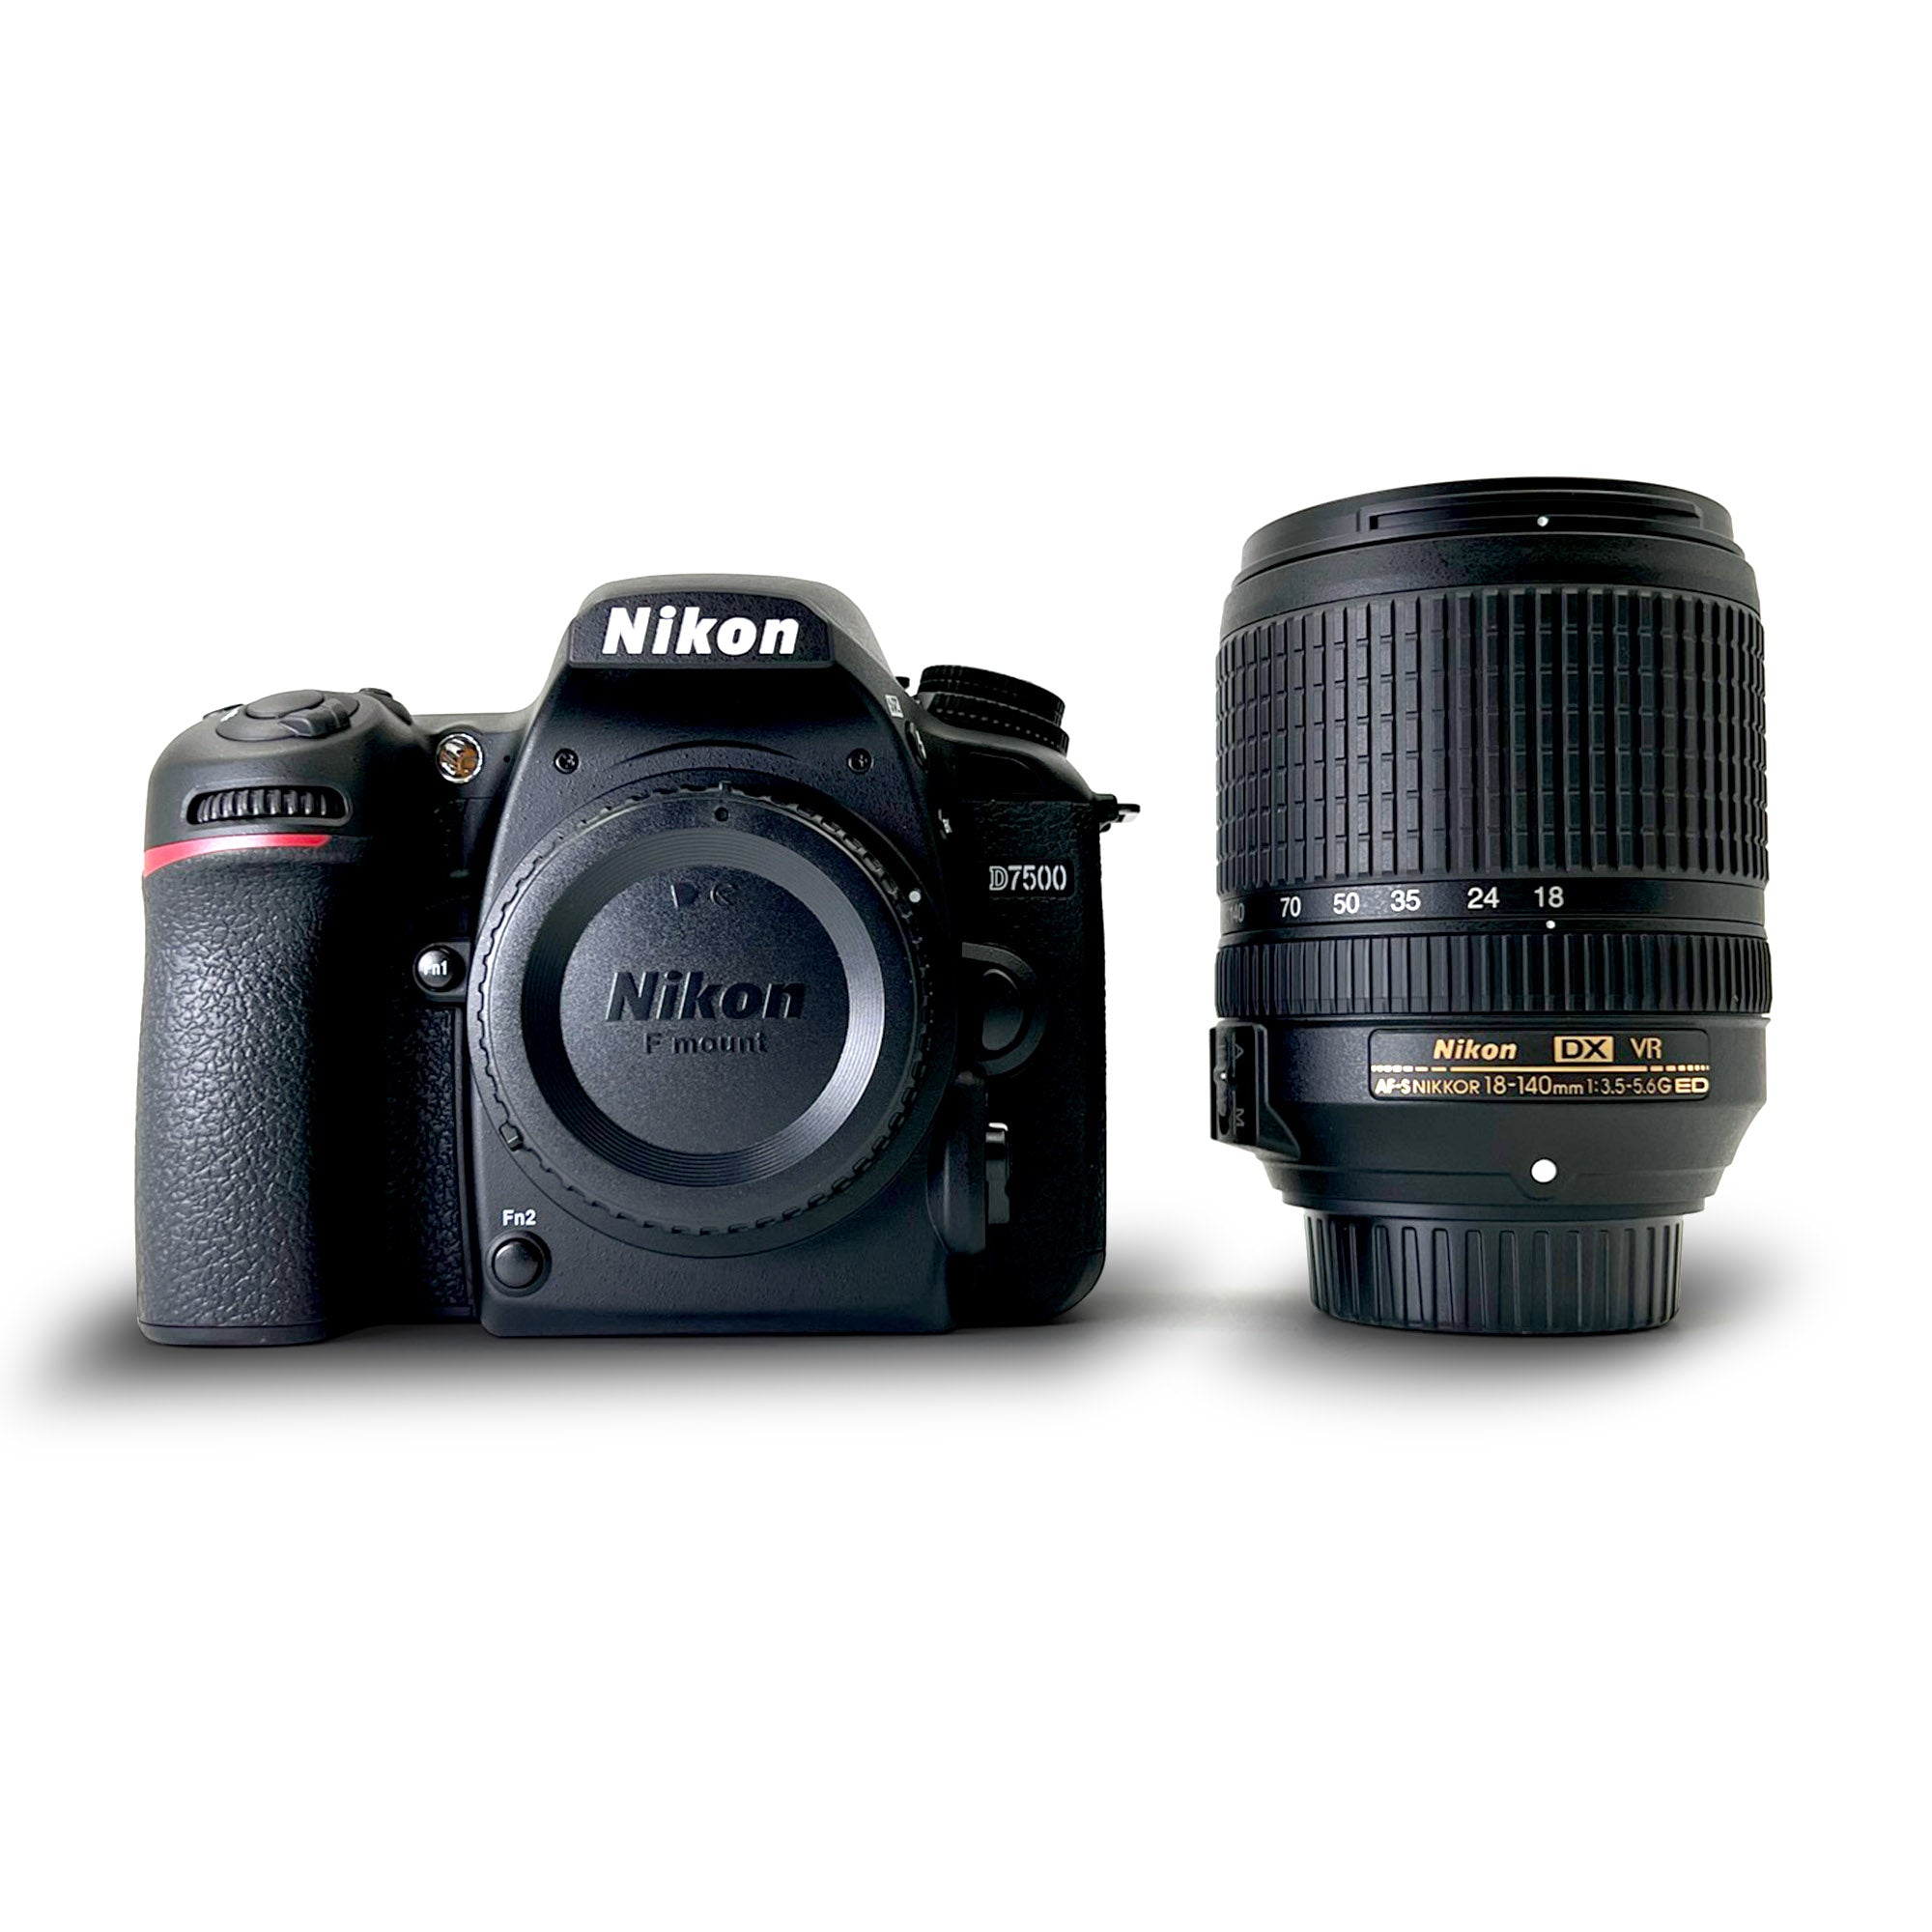 Nikon D5600 DSLR Camera with 18-140mm Lens and Accessory Kit